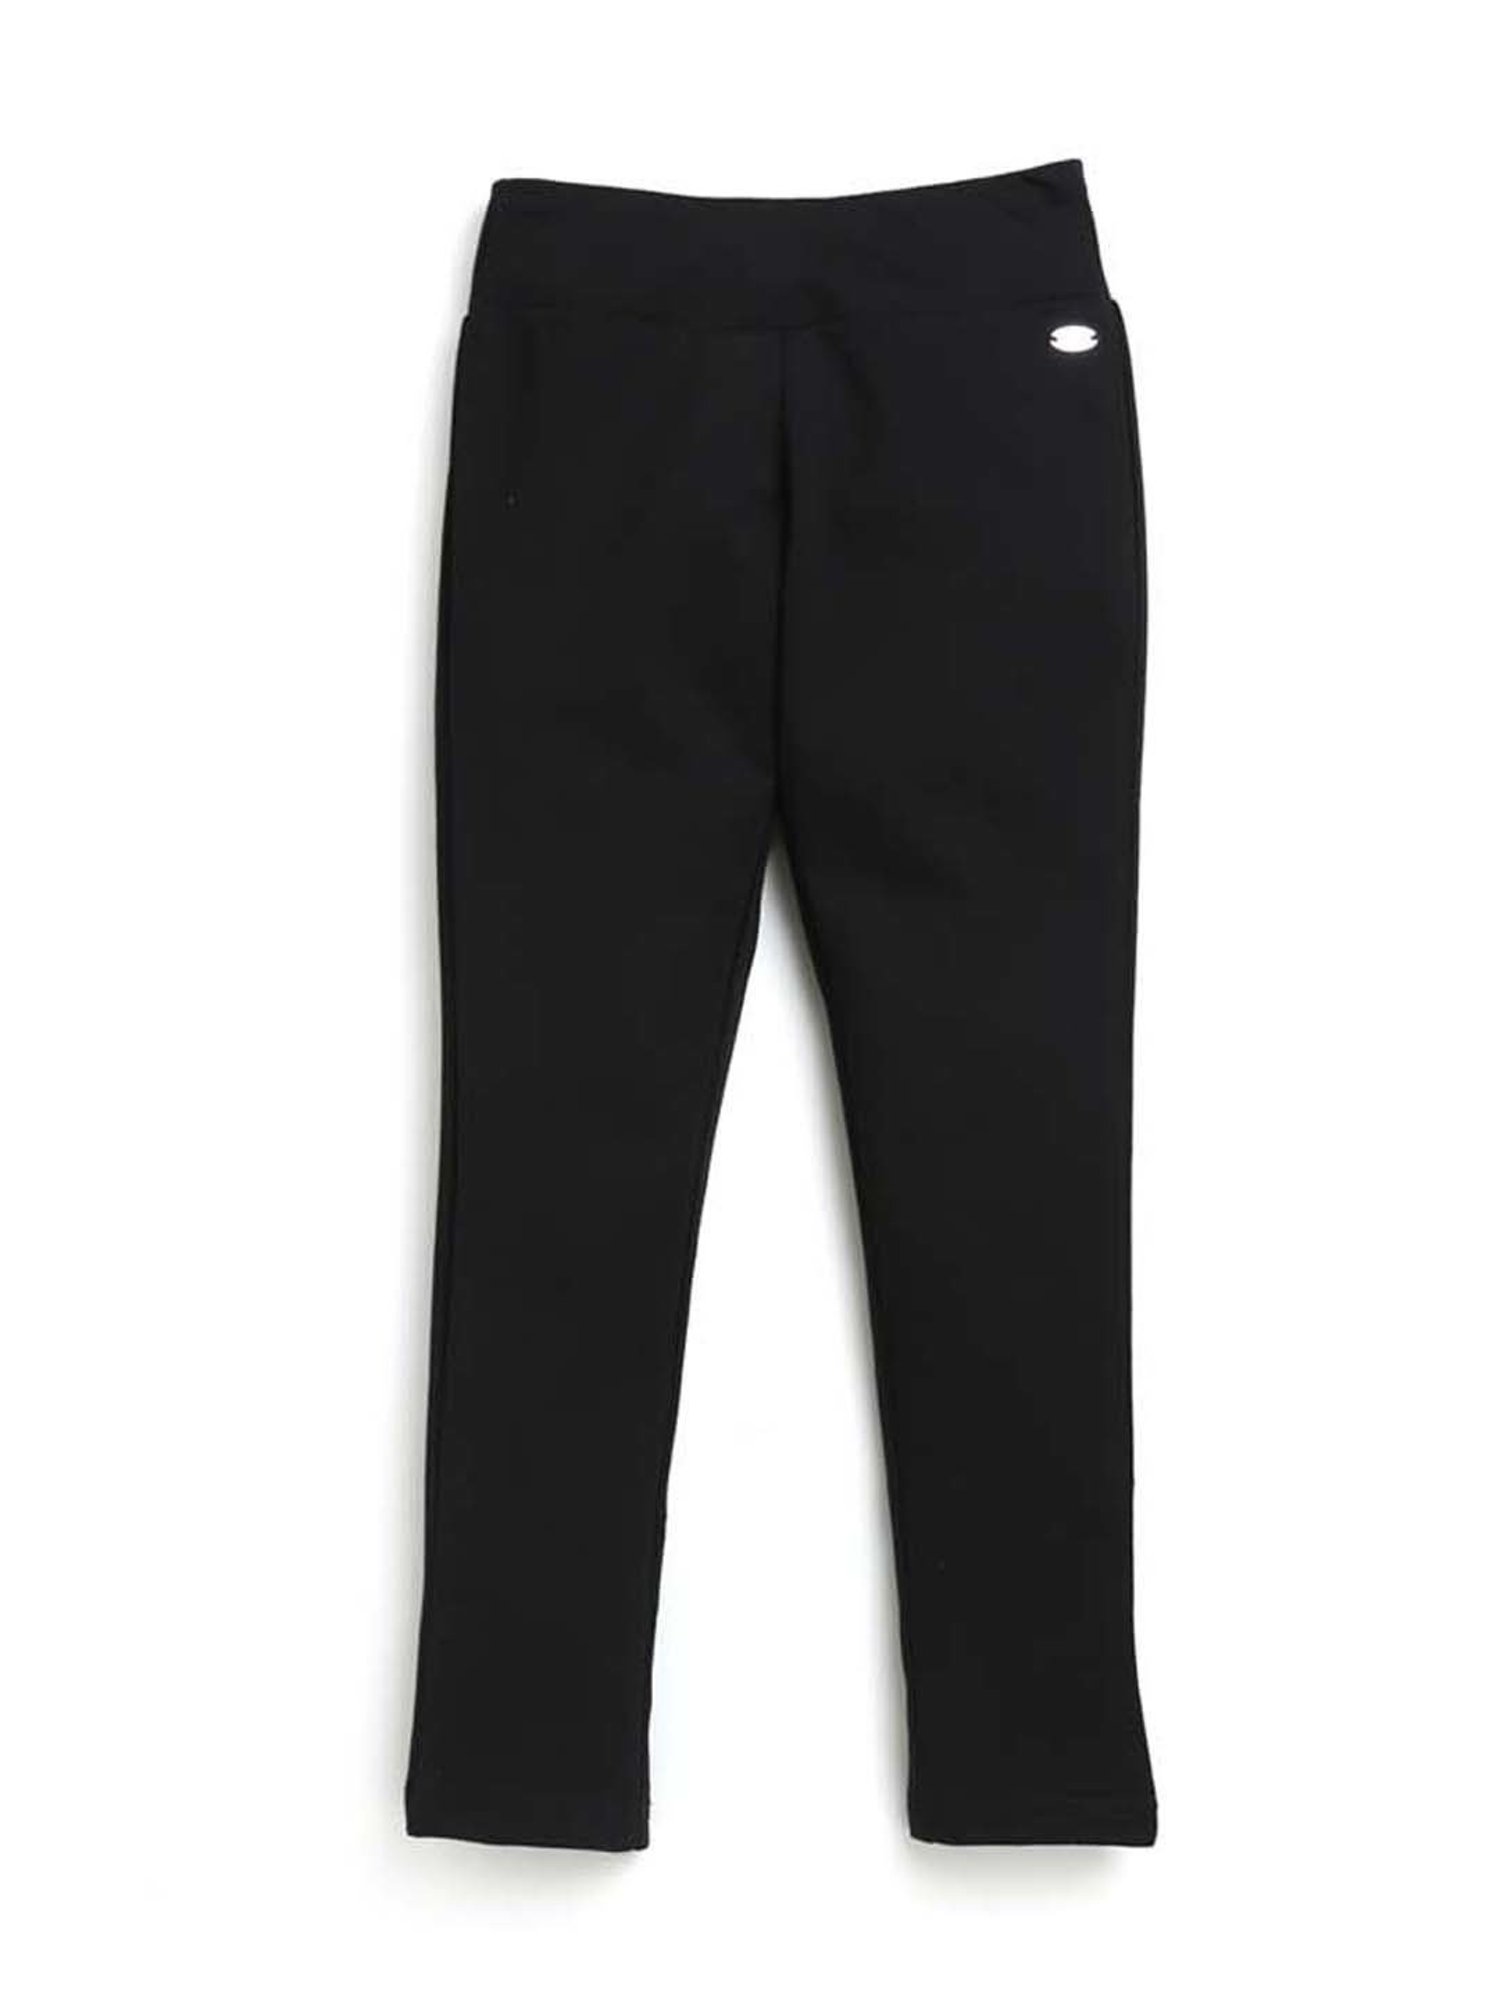 Boys Black Tailored Fit Adjustable Waist Trousers | Milano Mayfair -  childrensspecialoccasionwear.co.uk